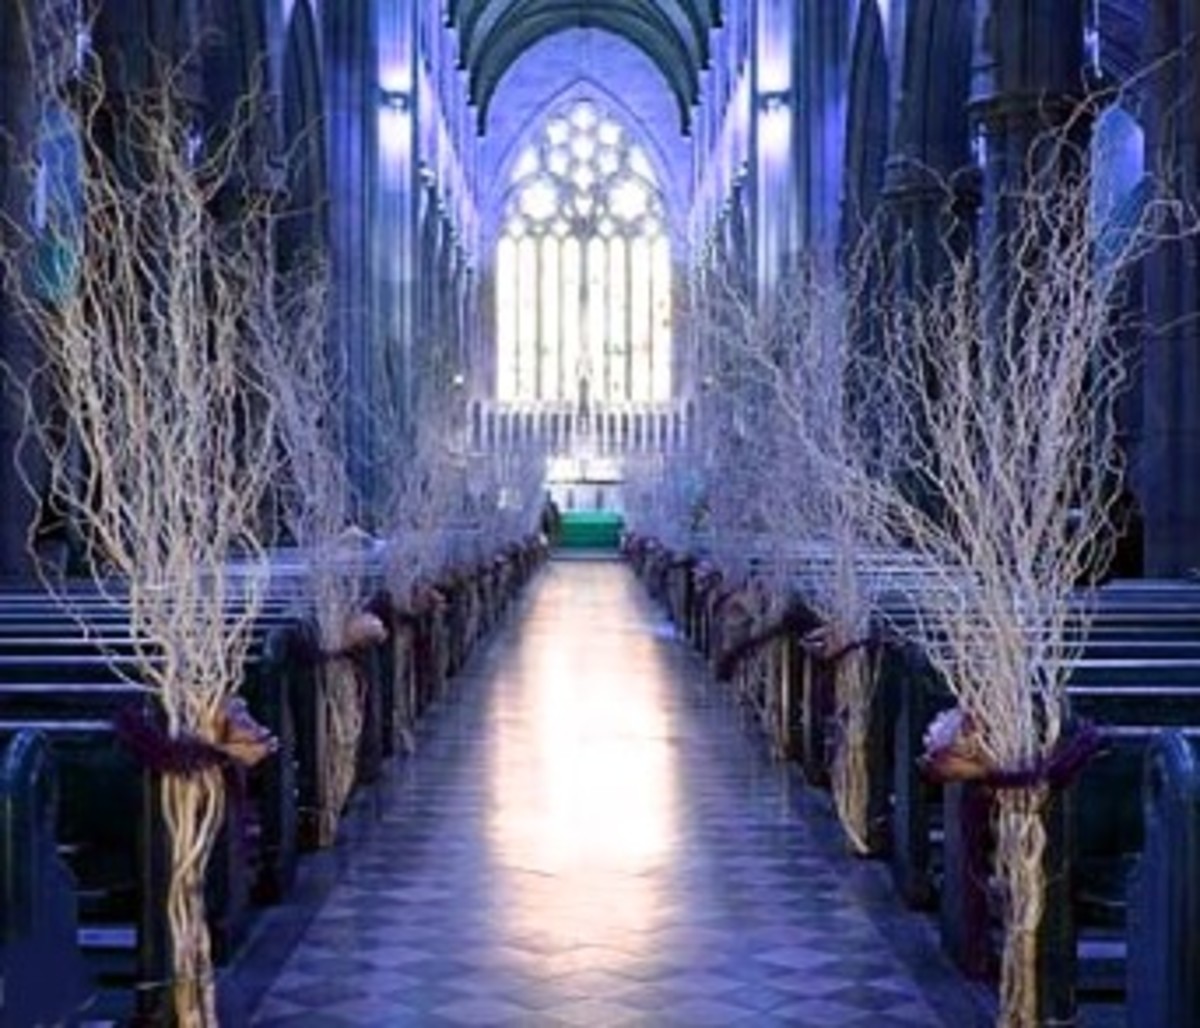 Clusters of tree branches decorating the aisle